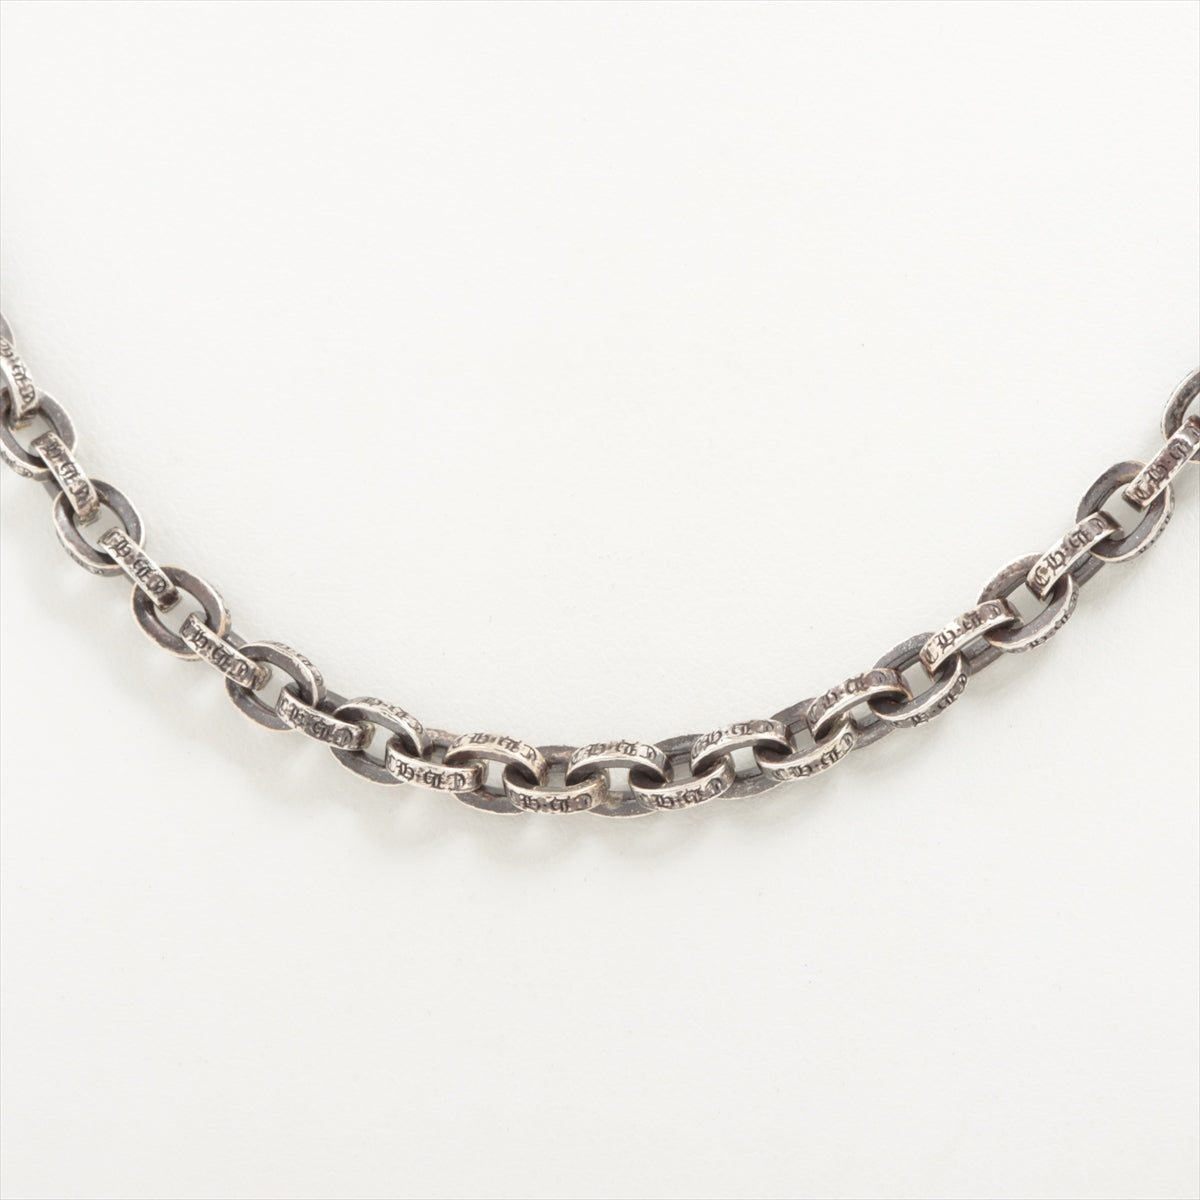 Chrome Hearts Paper Chain 20 inches Necklace 925×14K 32.7g